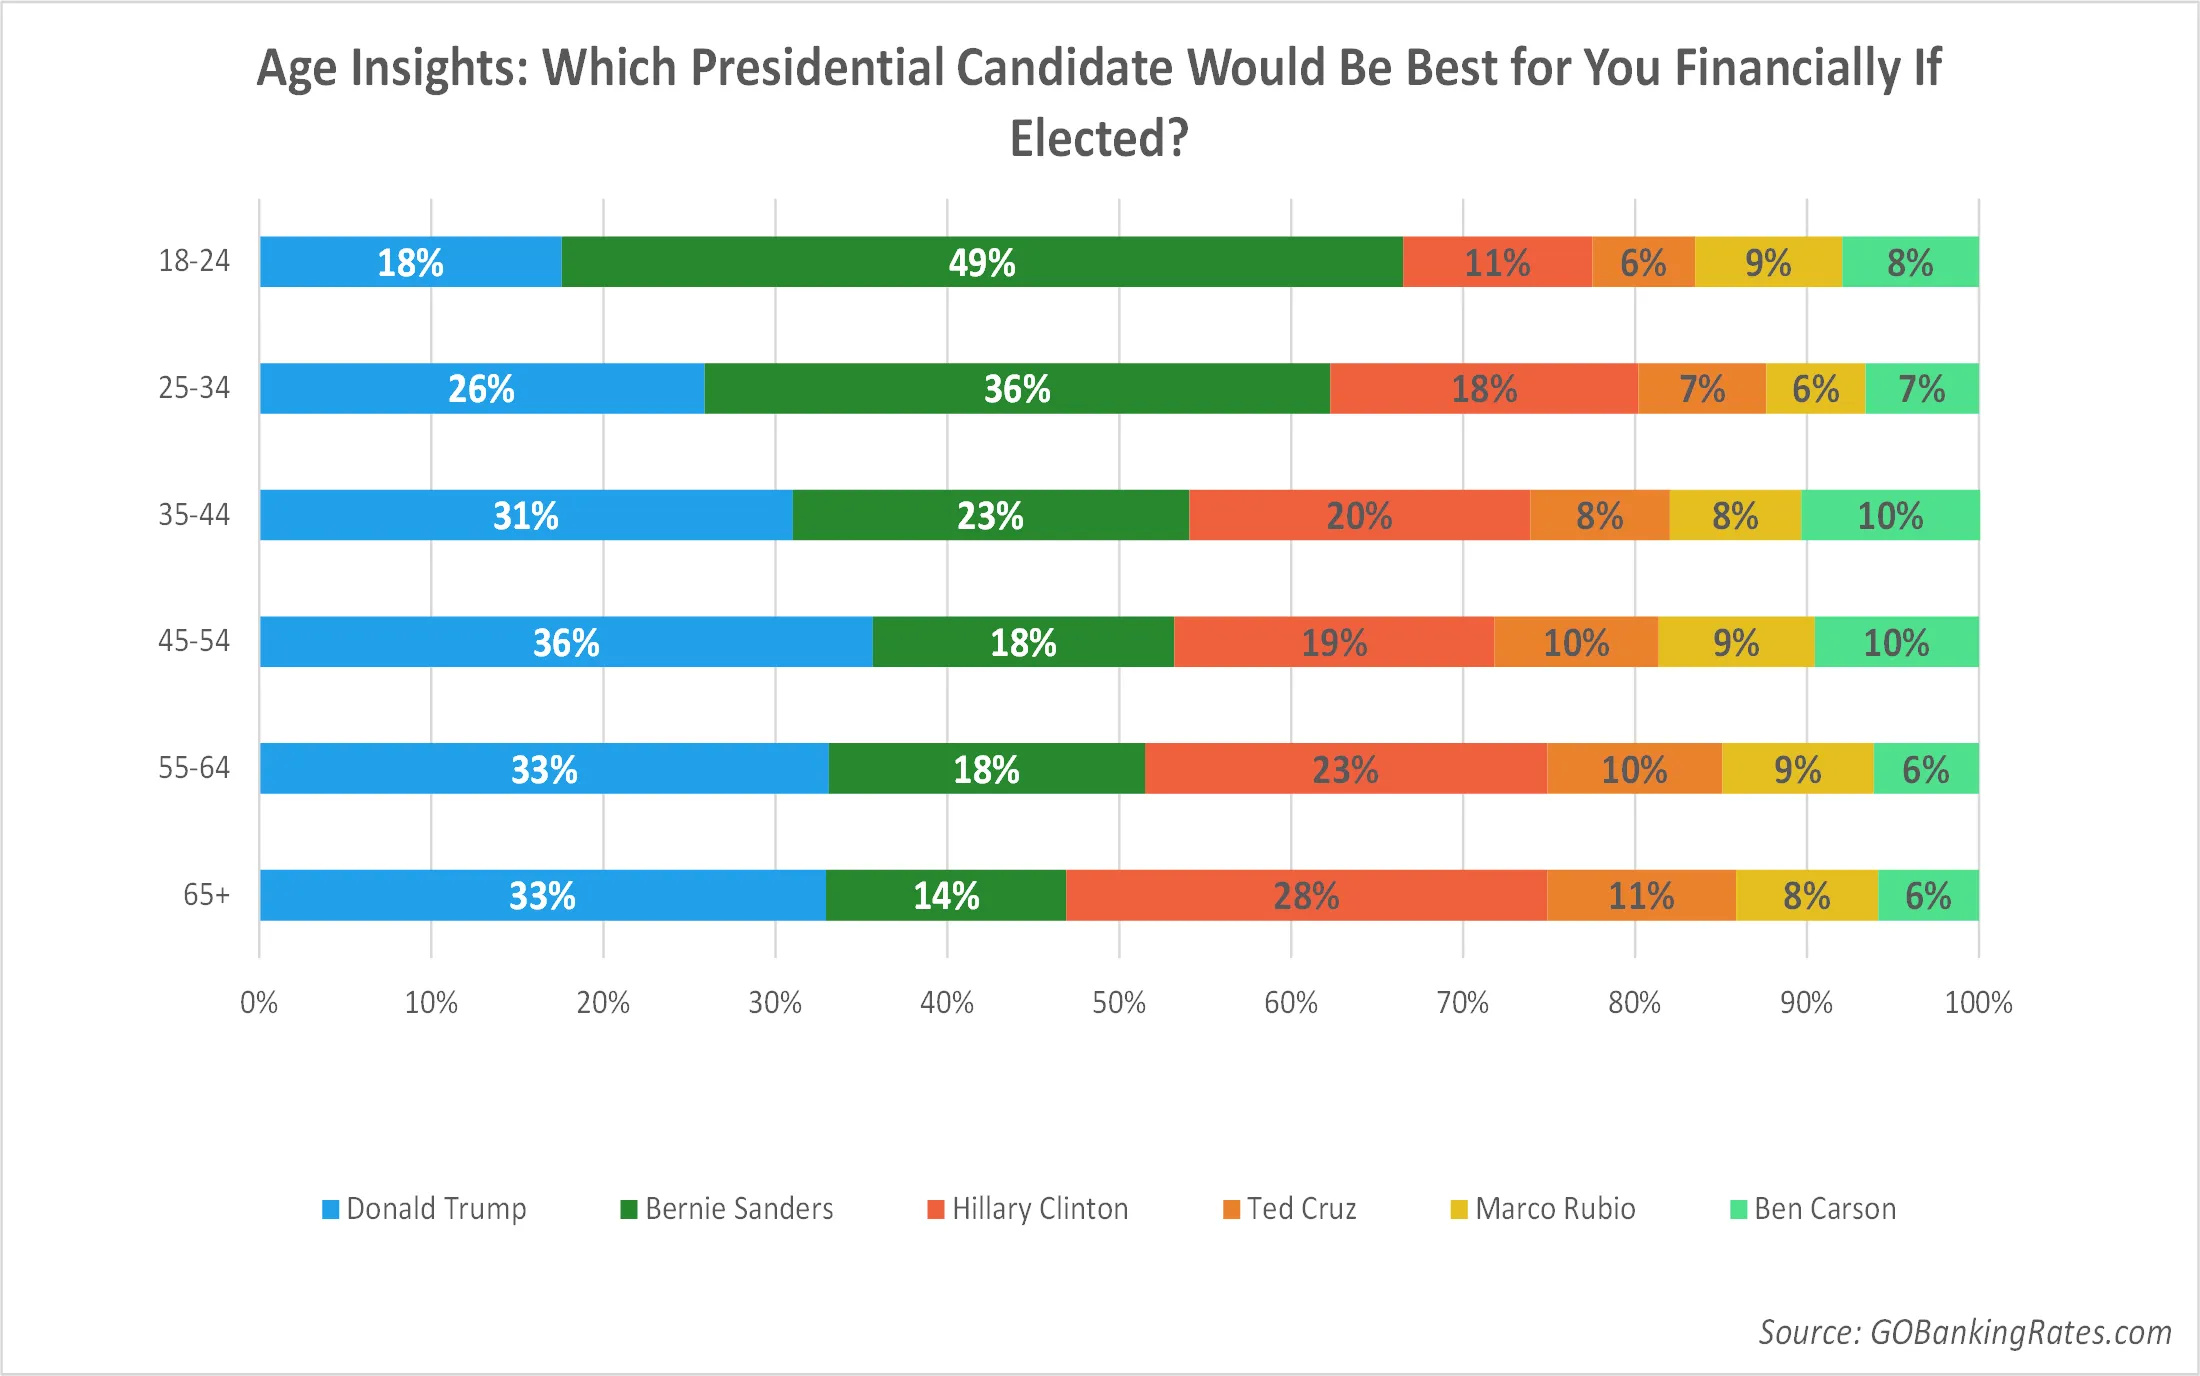 Age Insights: Which Presidential Candidate Would Be Best for You Financially If Elected?